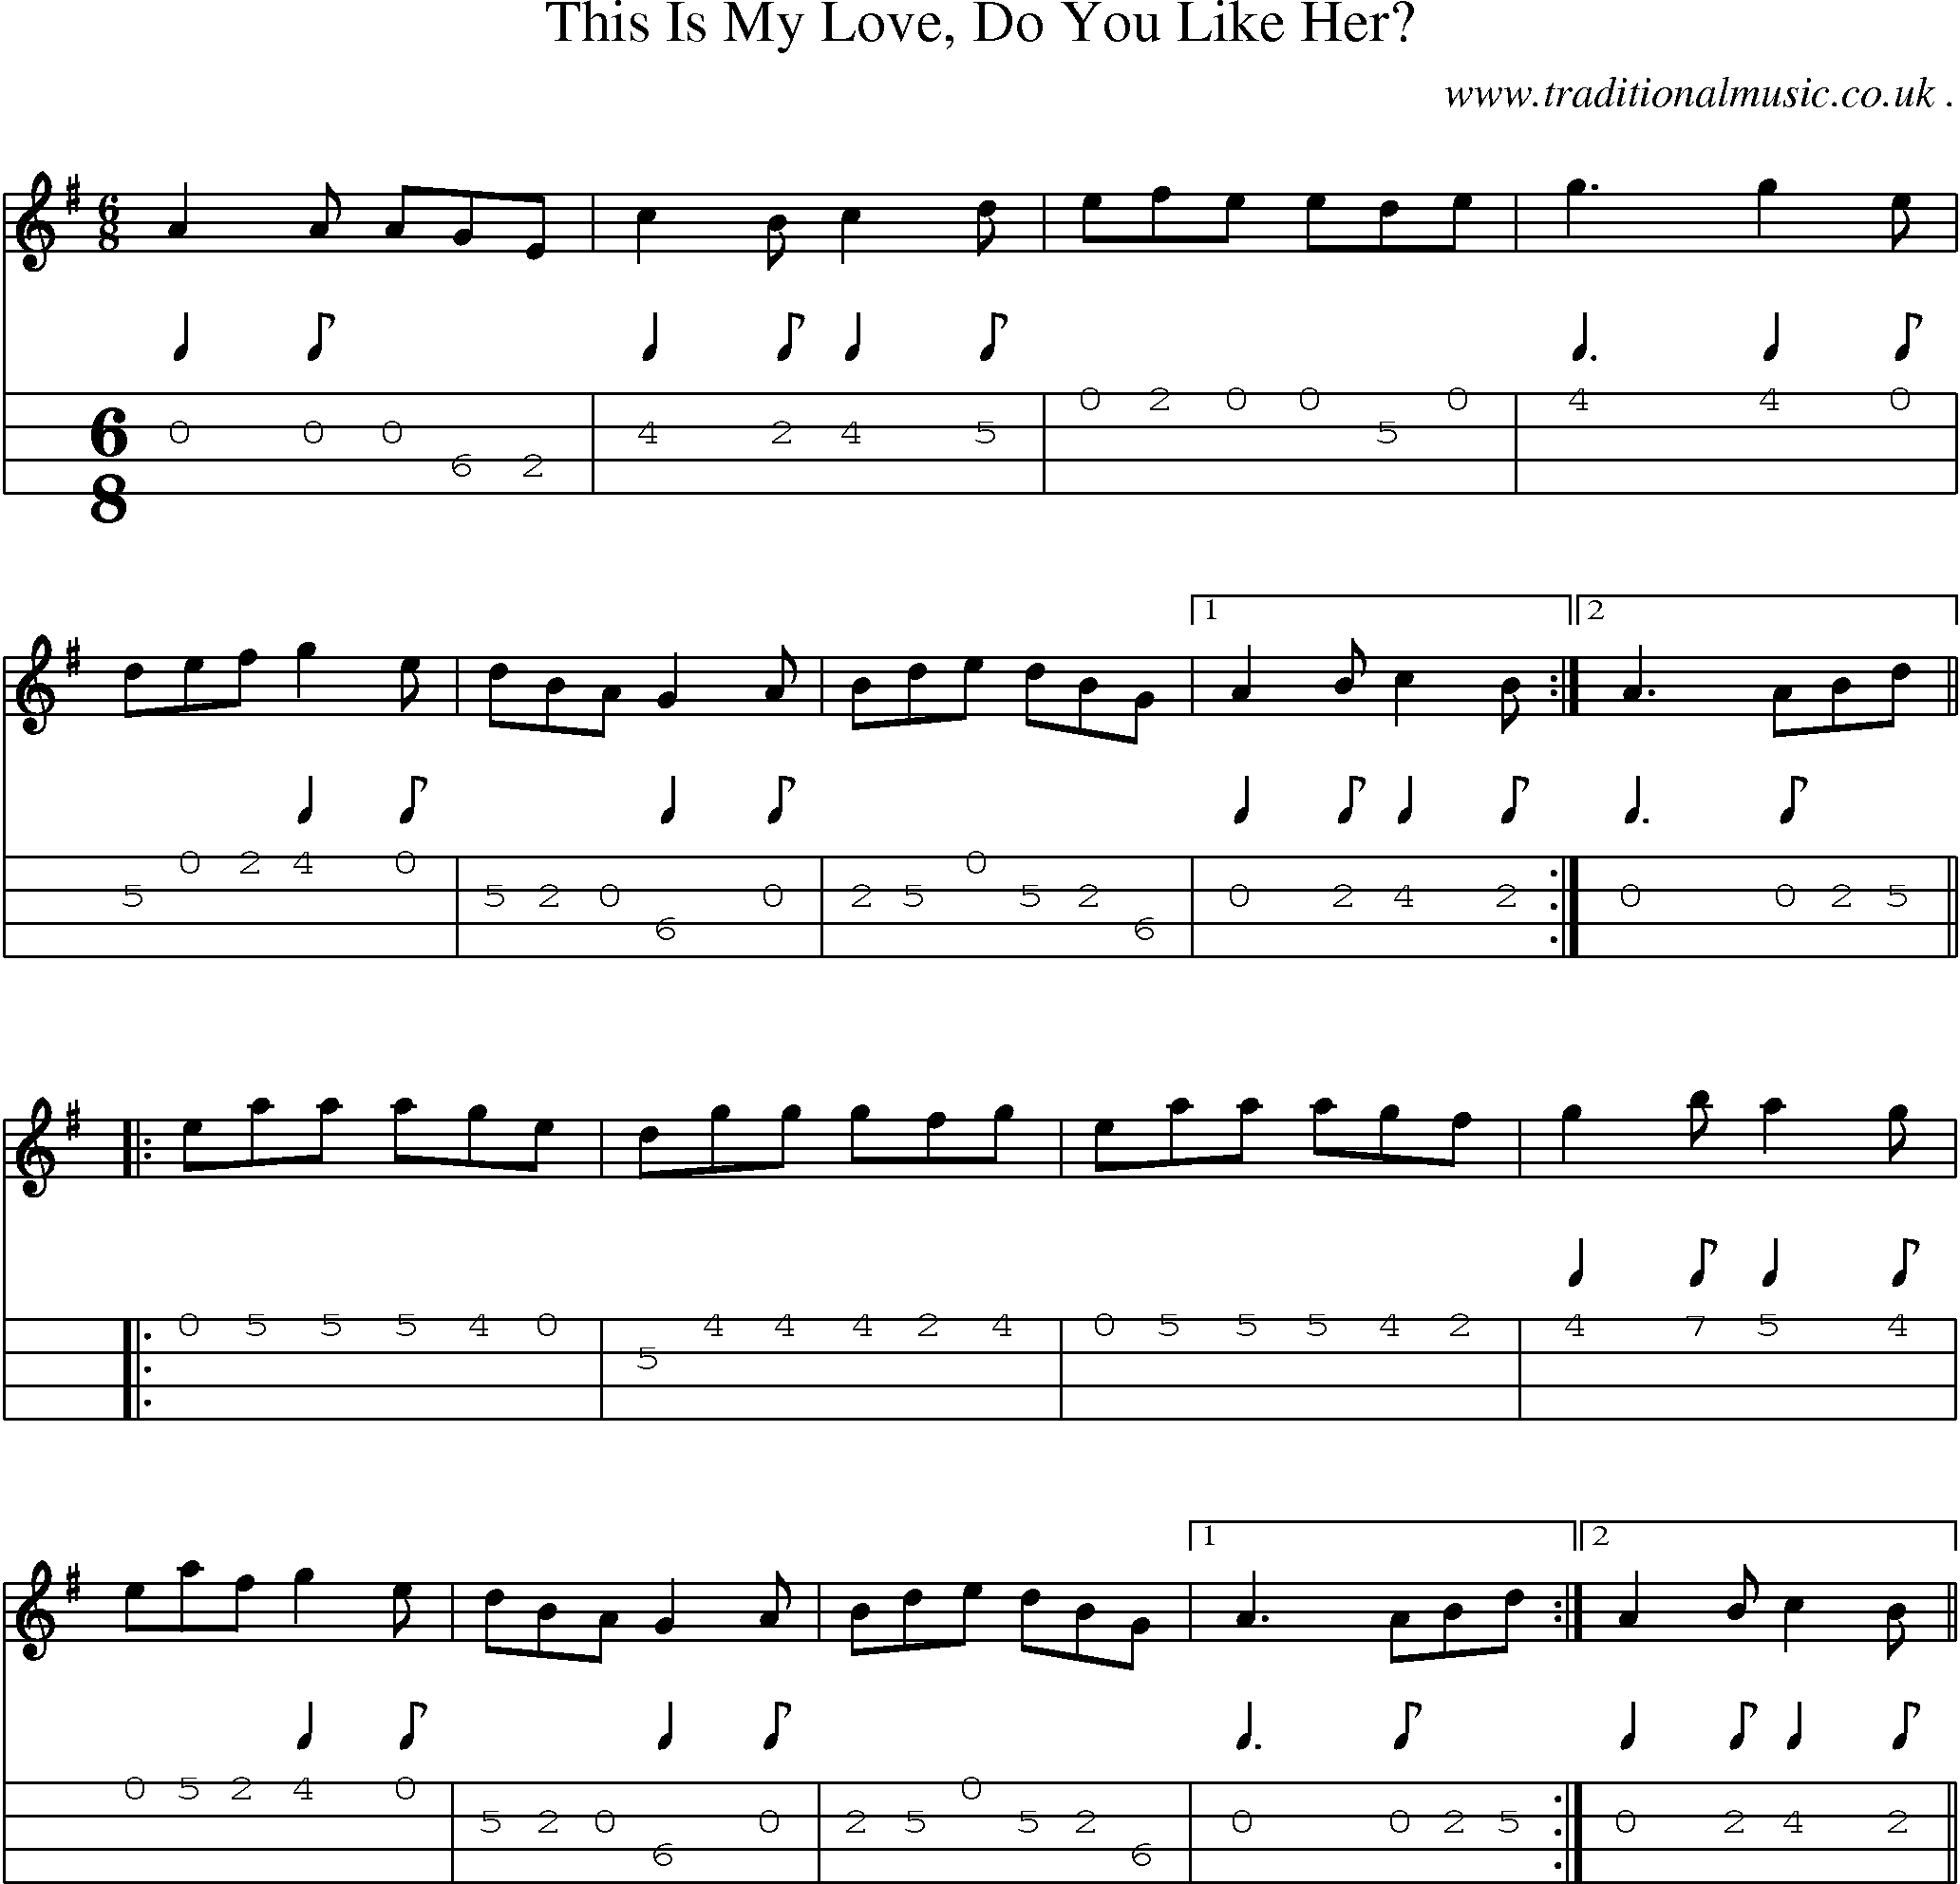 Sheet-Music and Mandolin Tabs for This Is My Love Do You Like Her